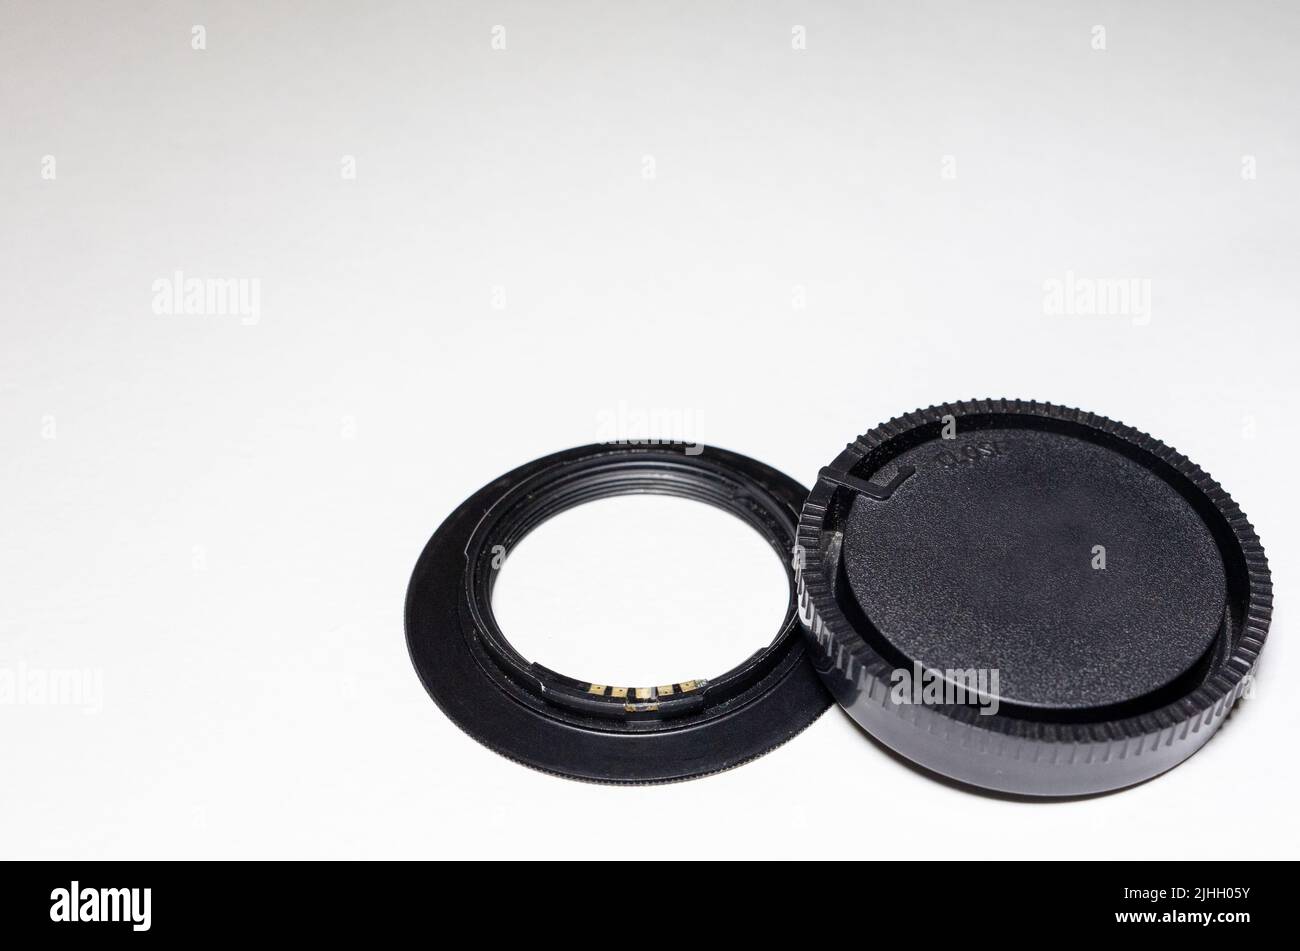 lens adapter and cap on a white background. Copy space. Stock Photo